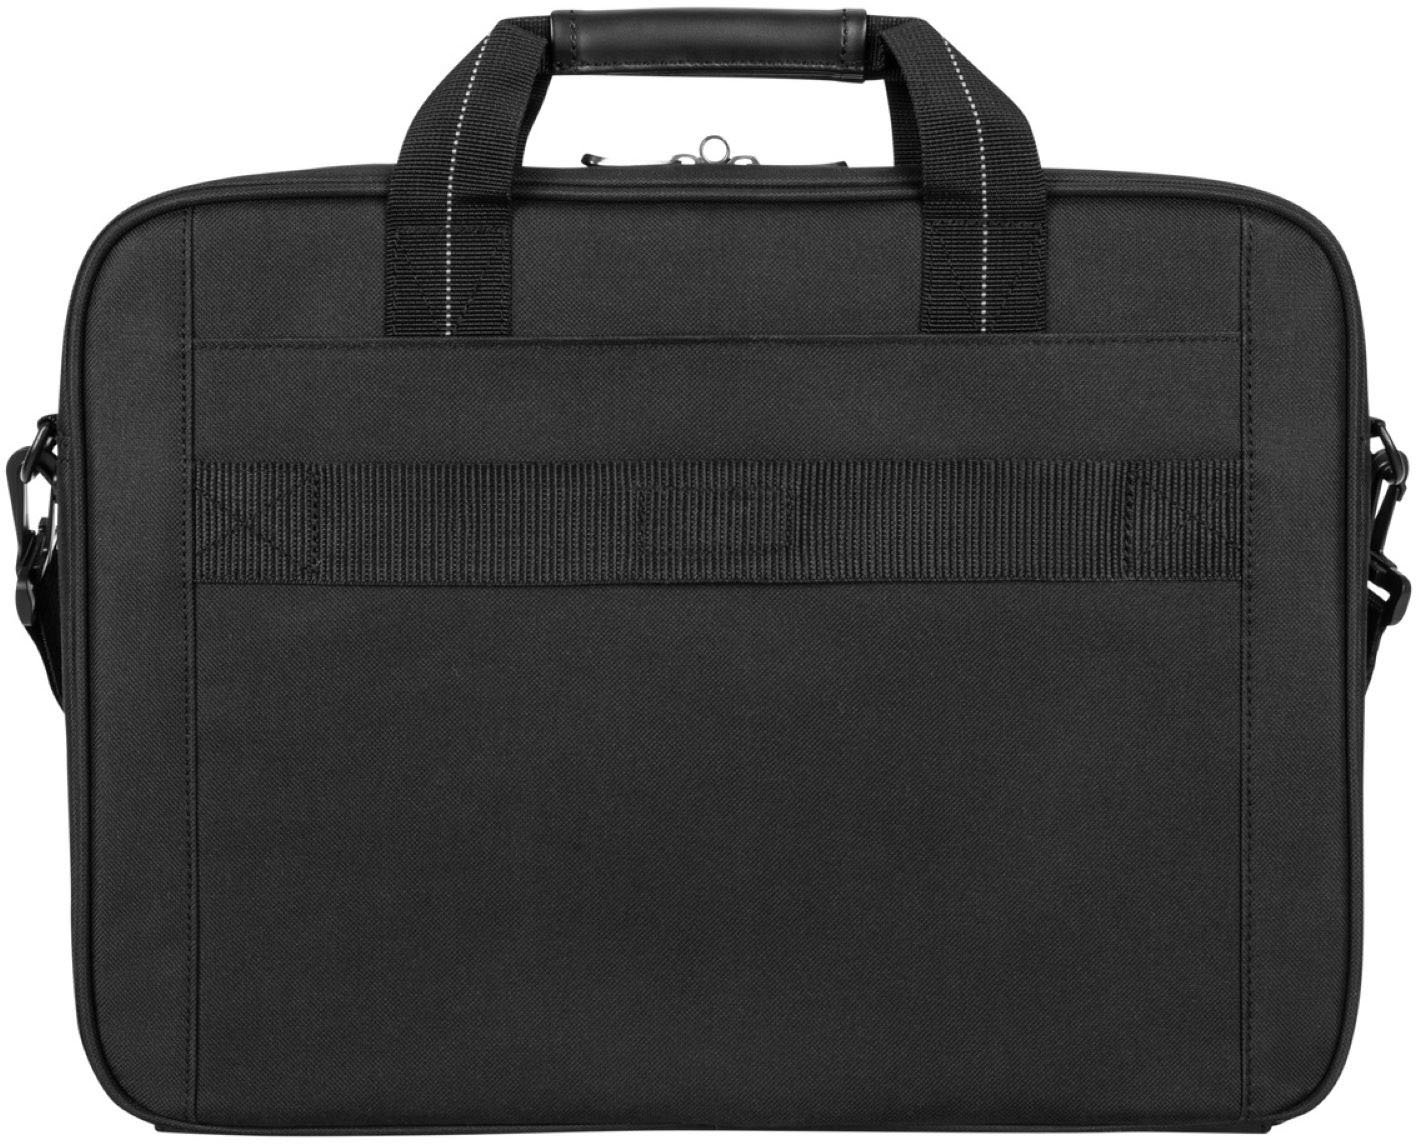 Back View: Solo New York - Notch Briefcase for 15.6" Laptop - Gray/Black